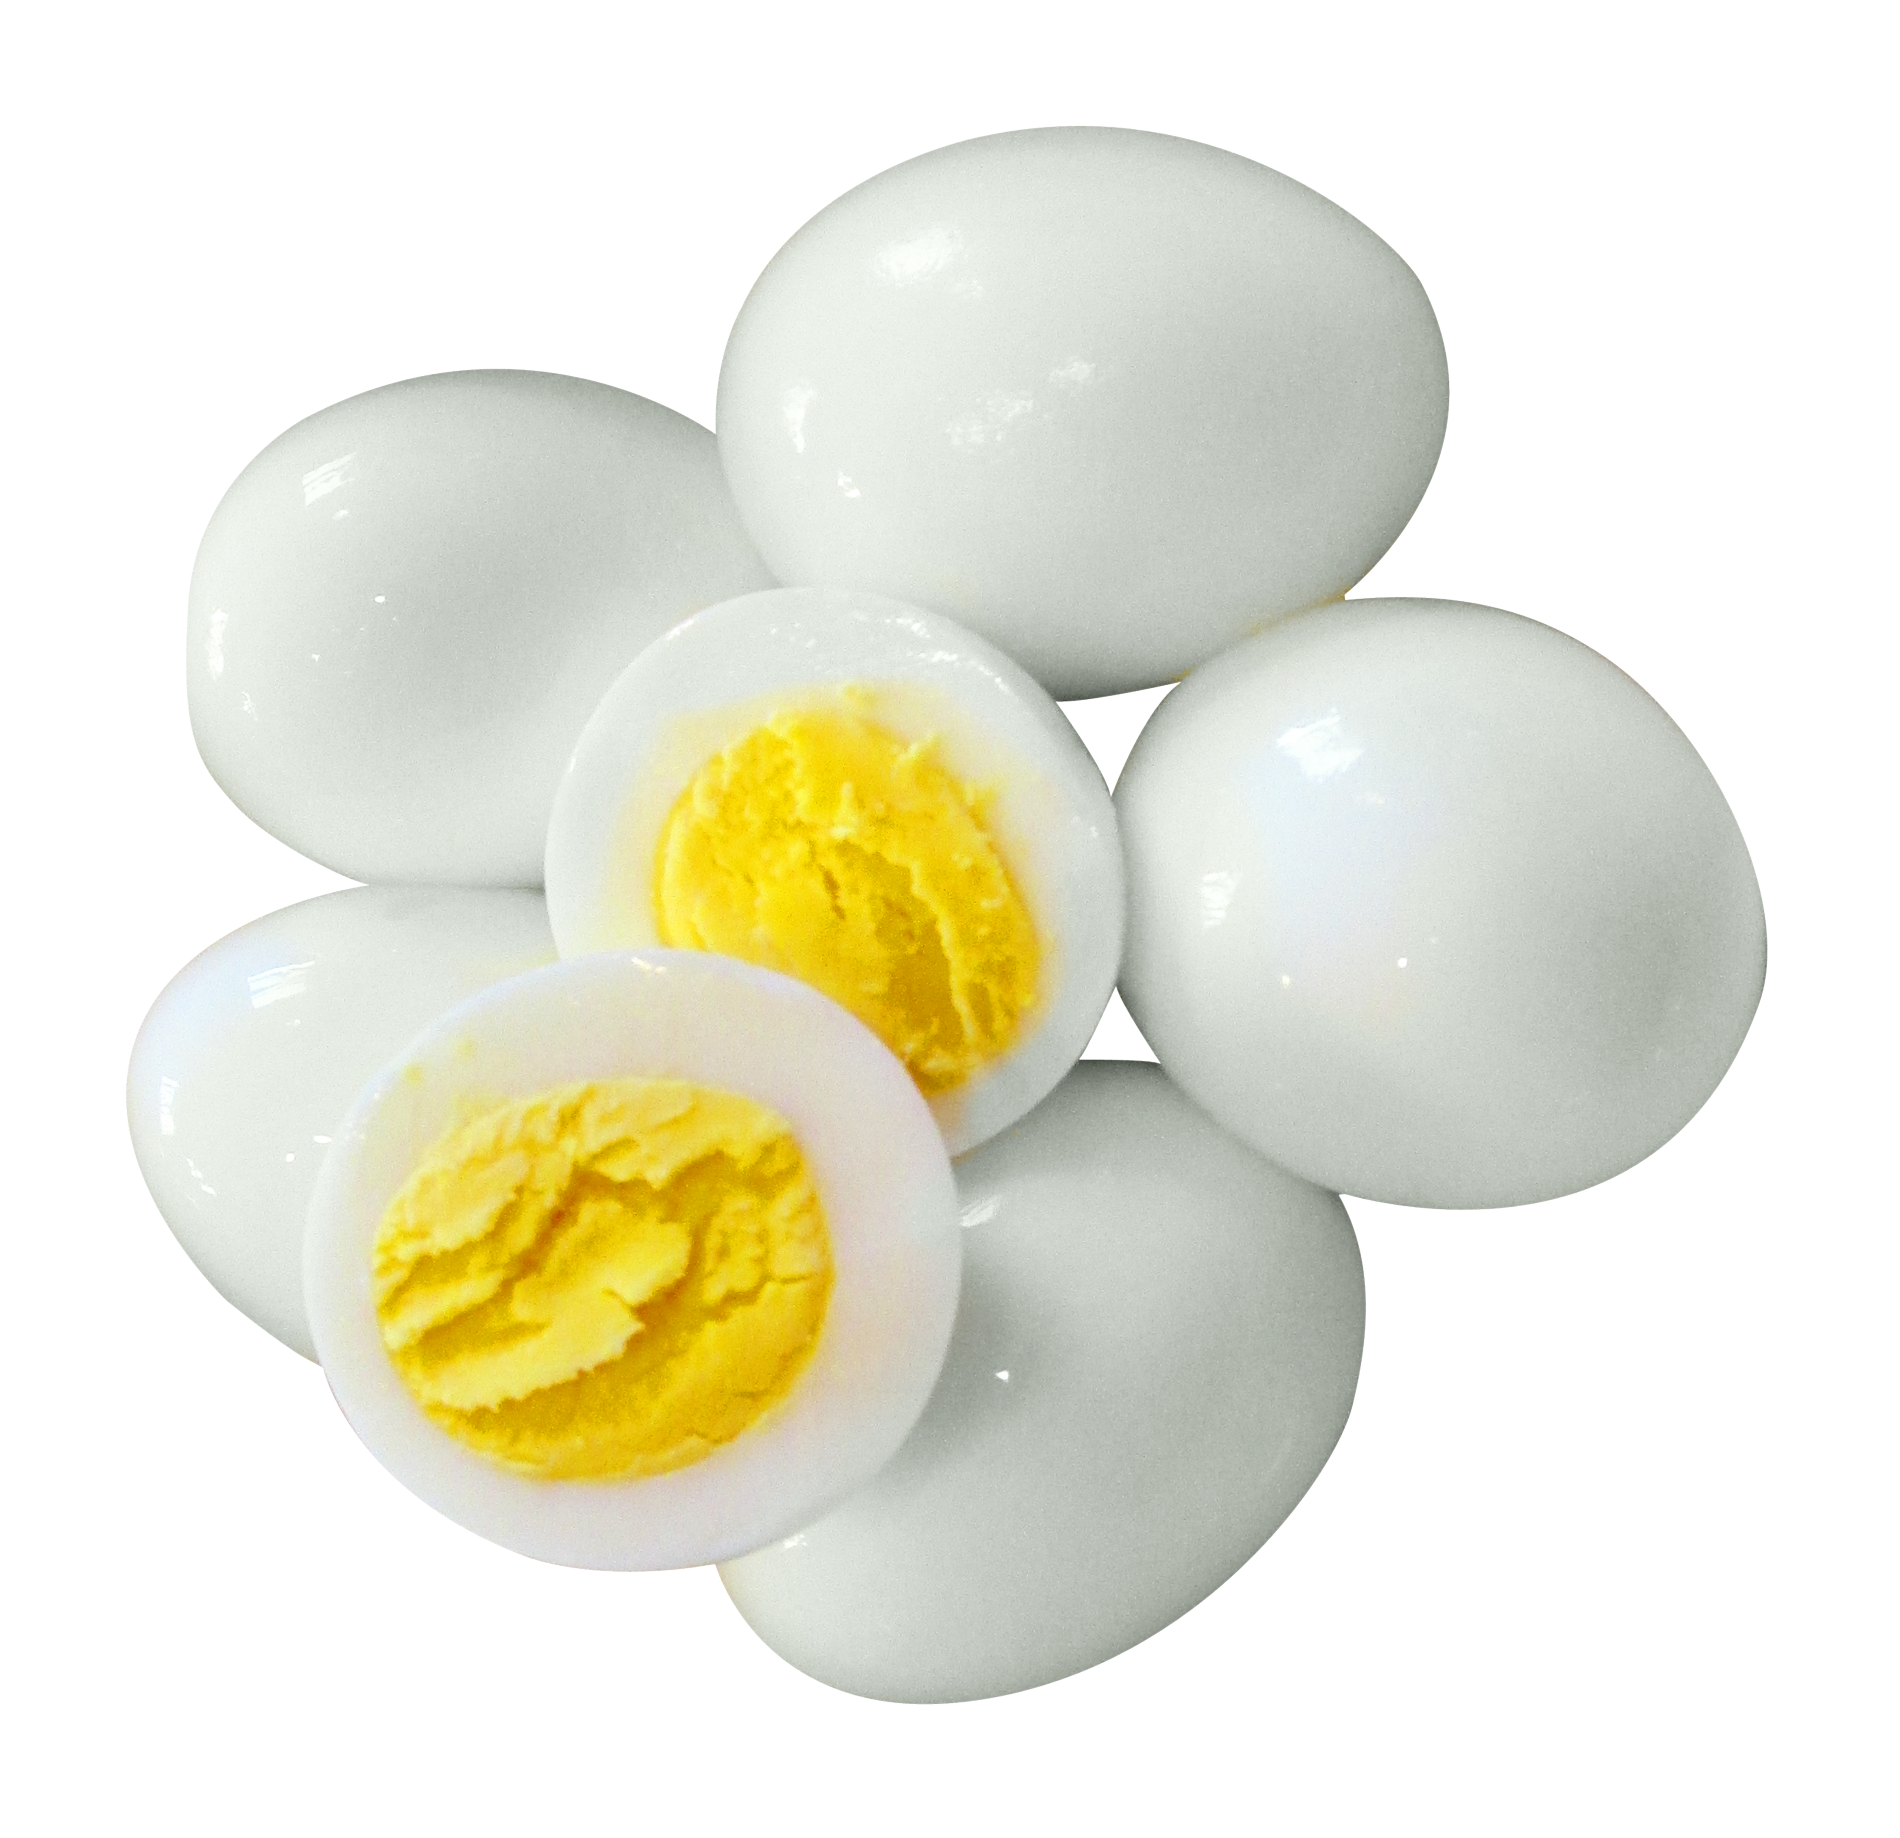 Eggs Png Stock Illustrations, Cliparts and Royalty Free Eggs Png Vectors